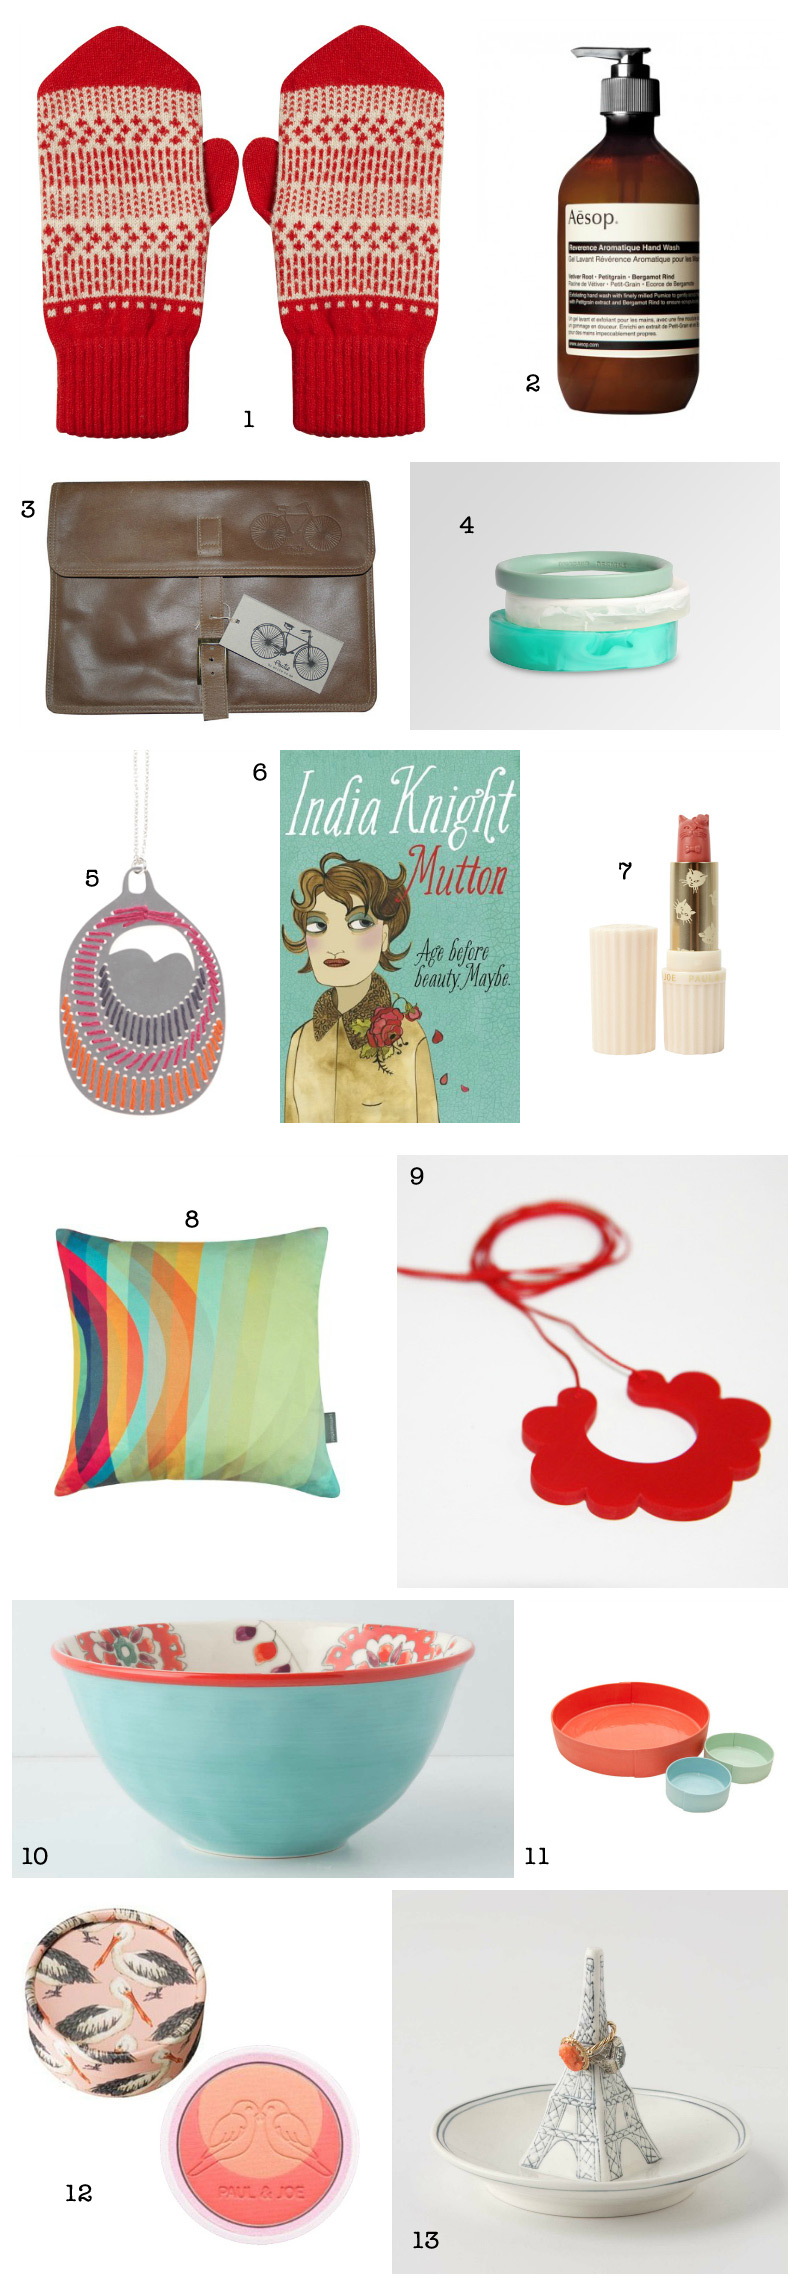 Christmas Gift Guide: Presents for mums, sisters and girlfriends